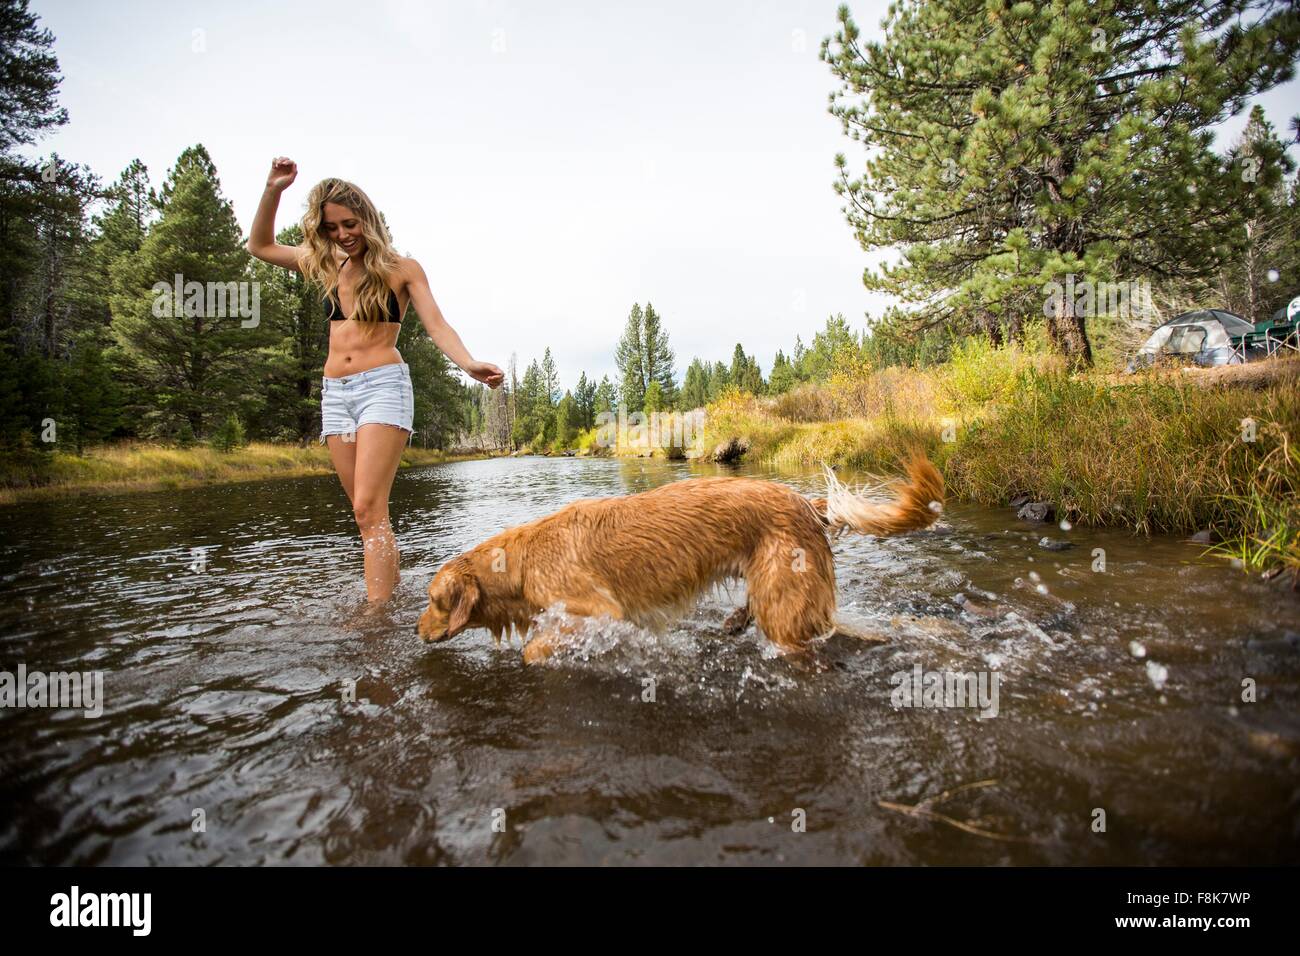 Young woman and dog paddling in river, Lake Tahoe, Nevada, USA Stock Photo